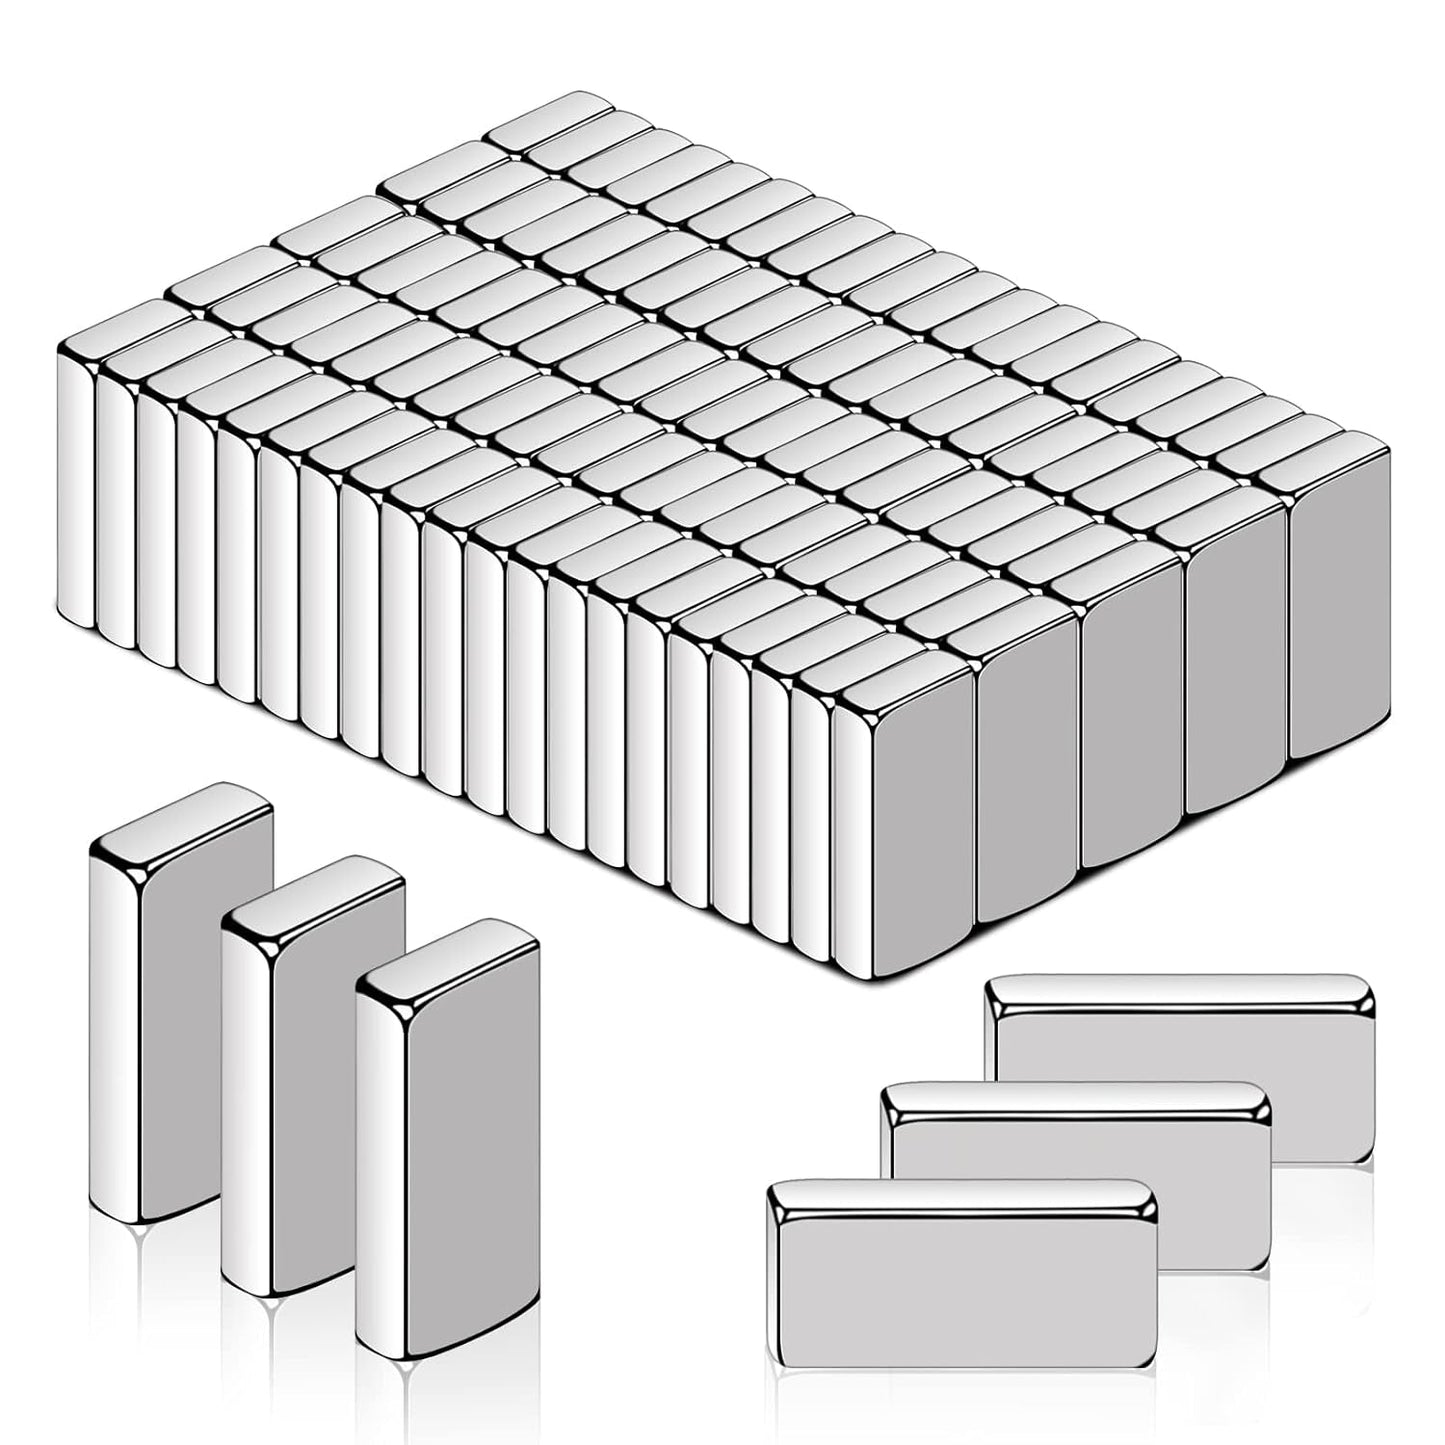 MIKEDE 30Pcs Strong Neodymium Magnets Bar, Heavy Duty Magnets, Rectangular Magnetic Bar, Small Powerful Rare Earth Magnets for Crafts, Refrigerator, Classroom, Kitchen, Office – 30X10X3Mm